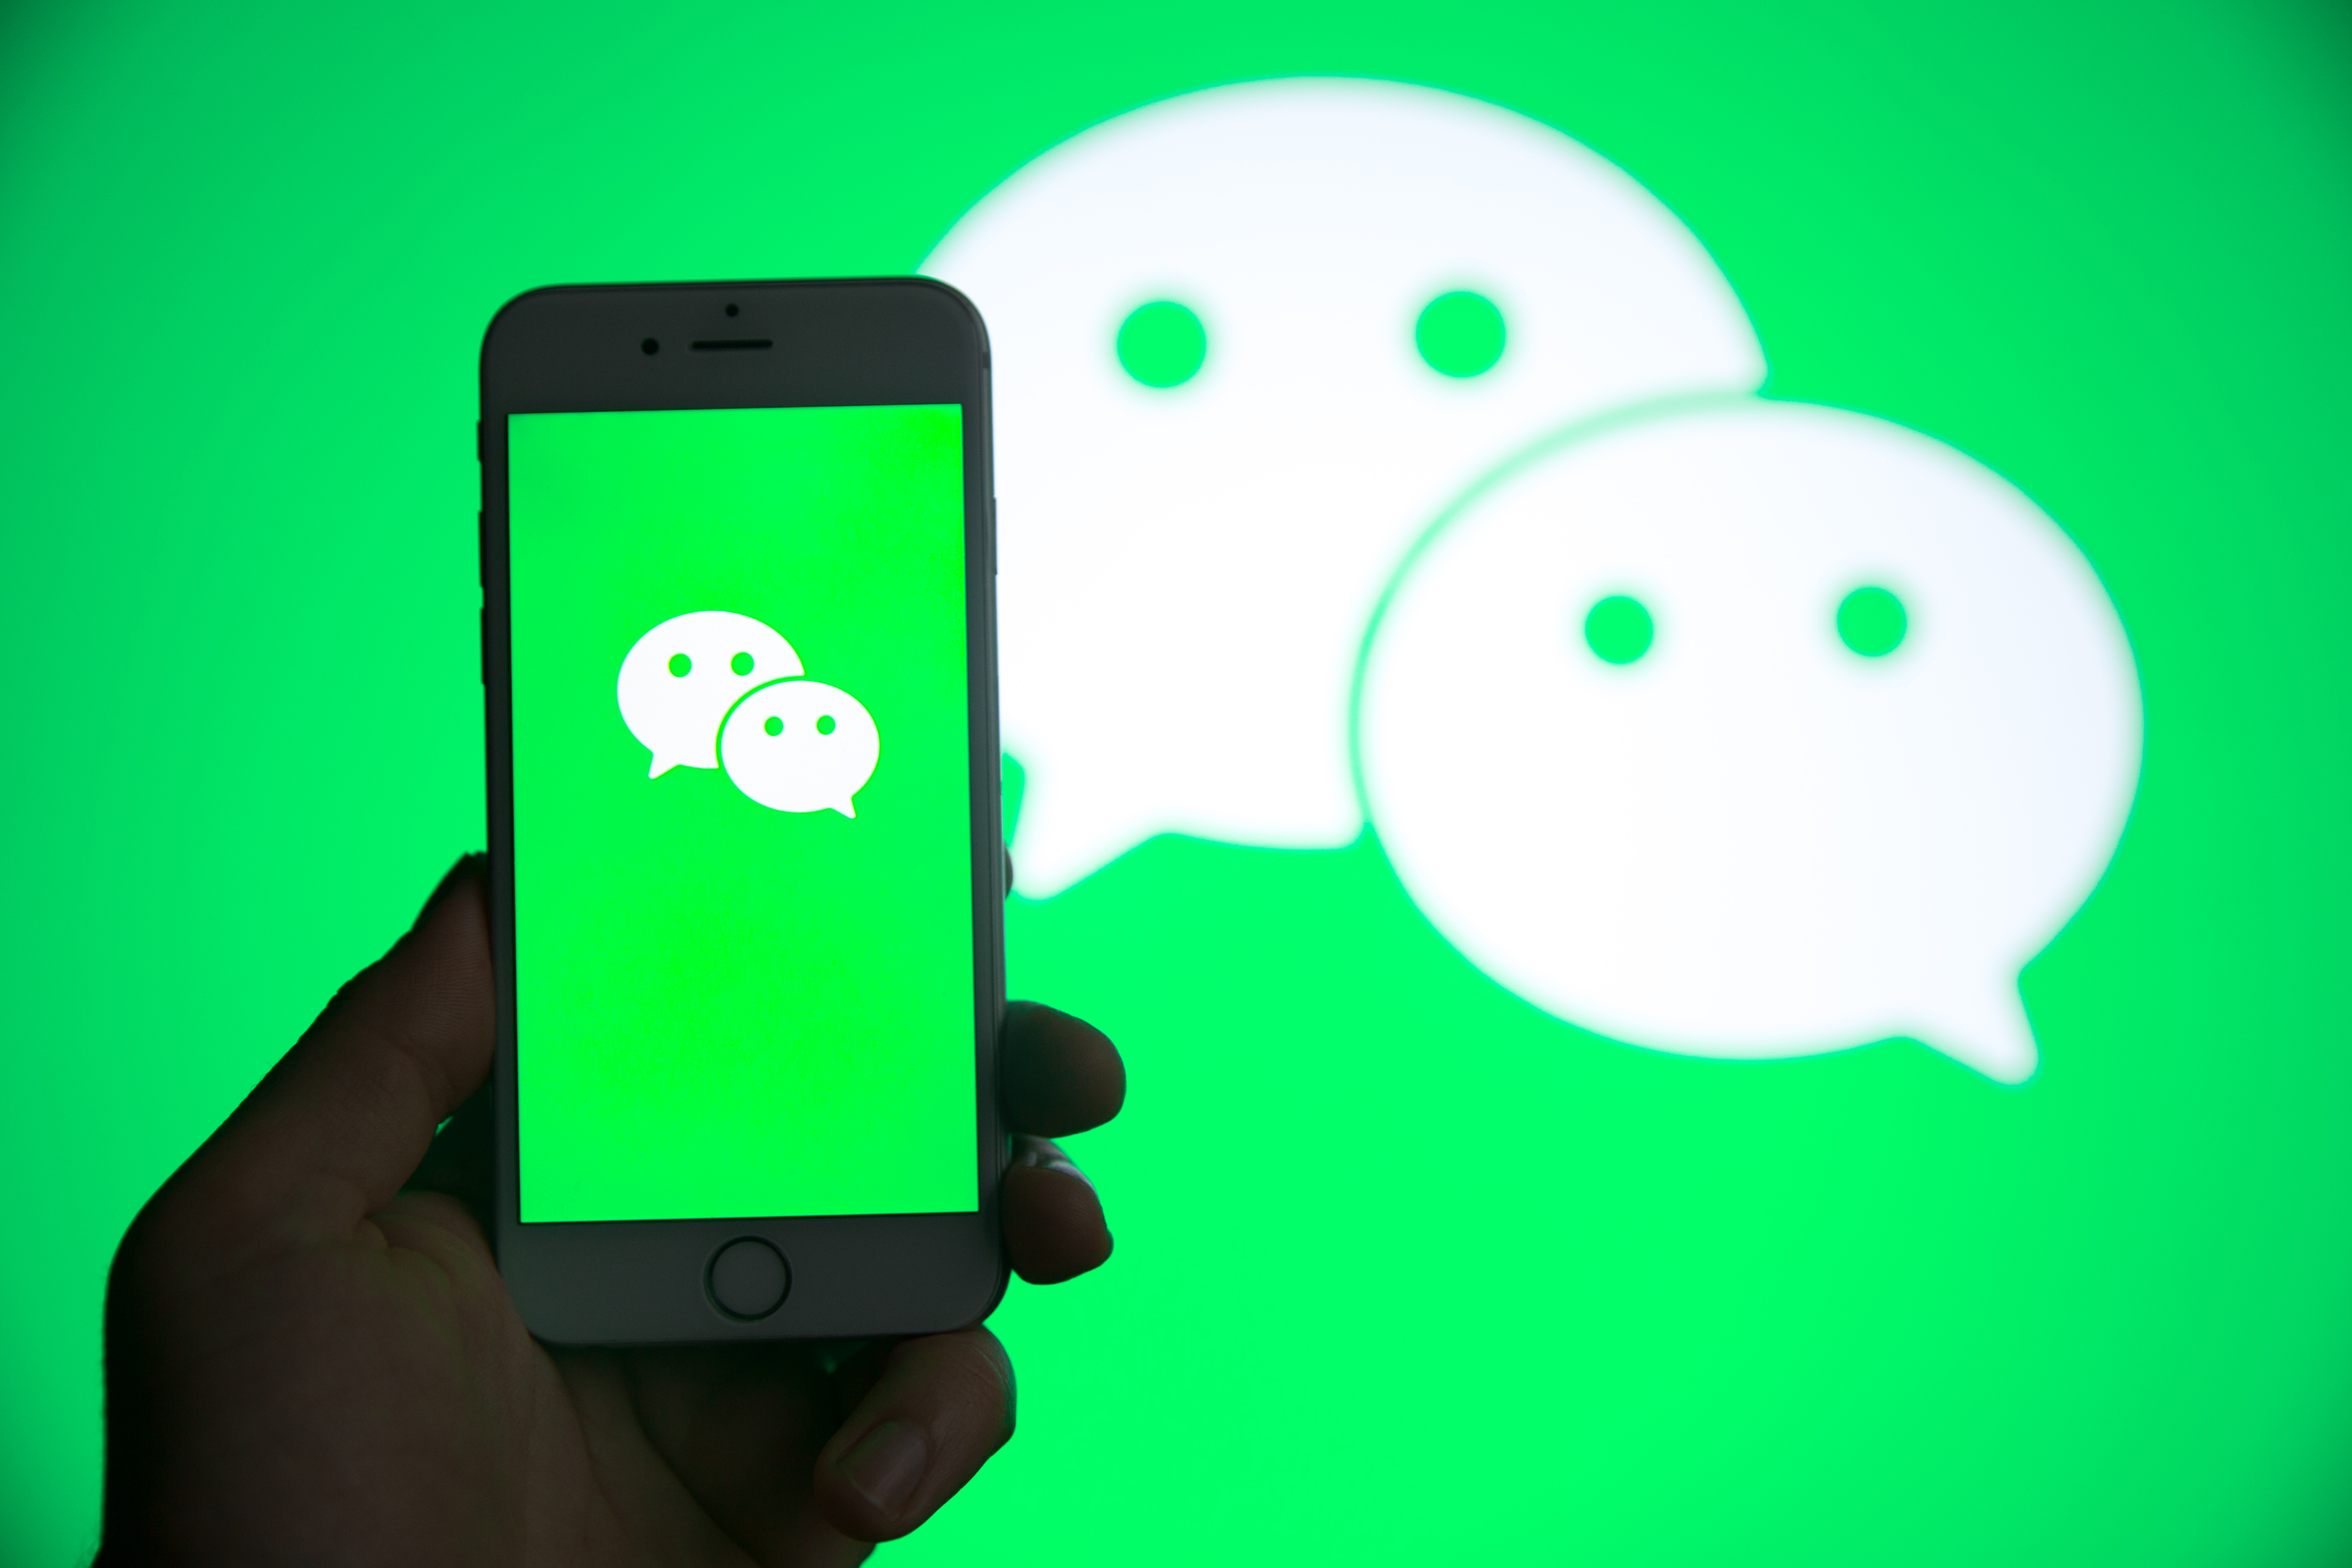 WeChat users in the US say a potential ban of the app would cut them off from friends and family in China